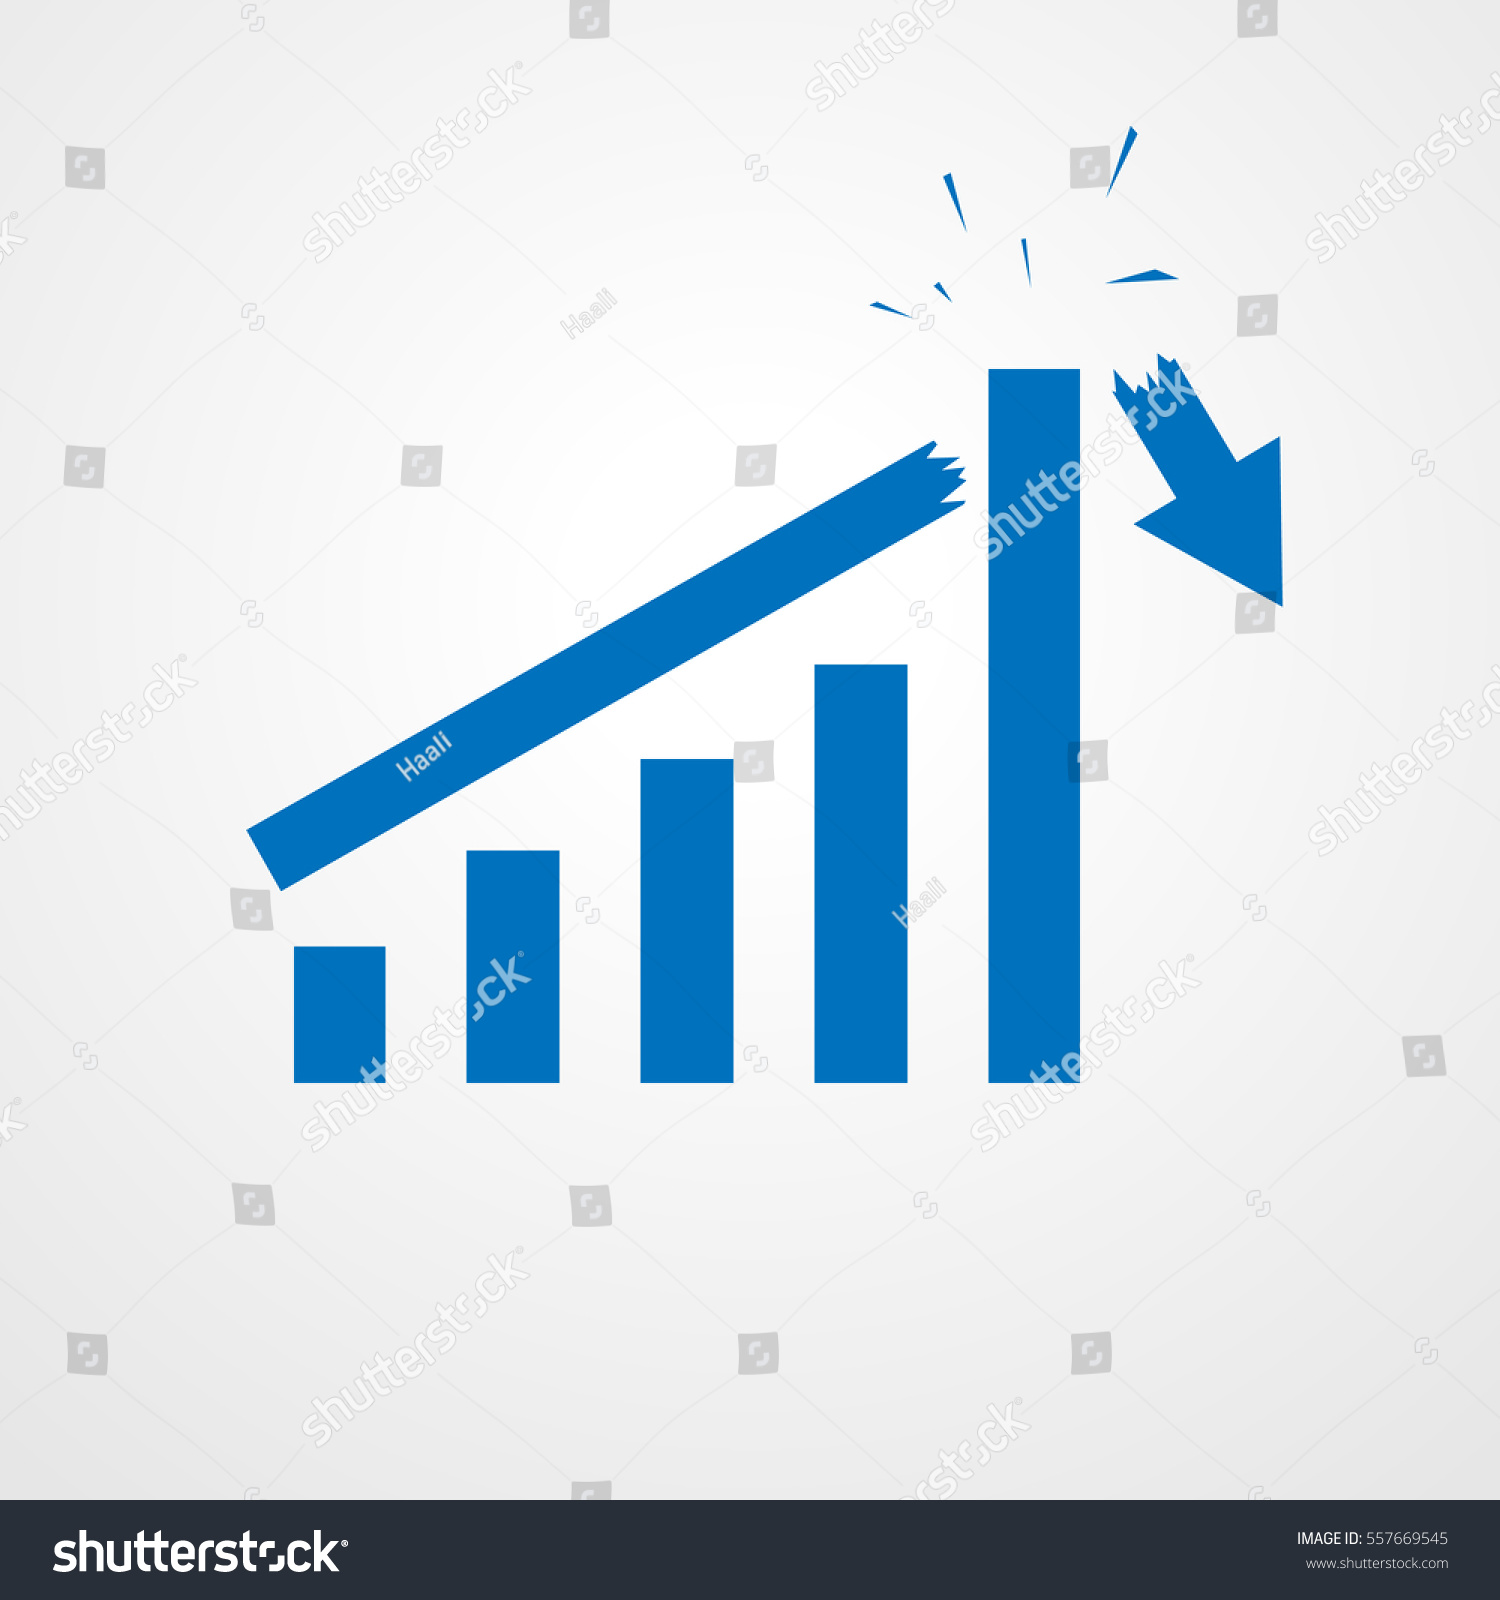 SVG of Growing bar graph icon with rising arrow. Financial forecast graph. Blue graph icon. Vector illustration. svg